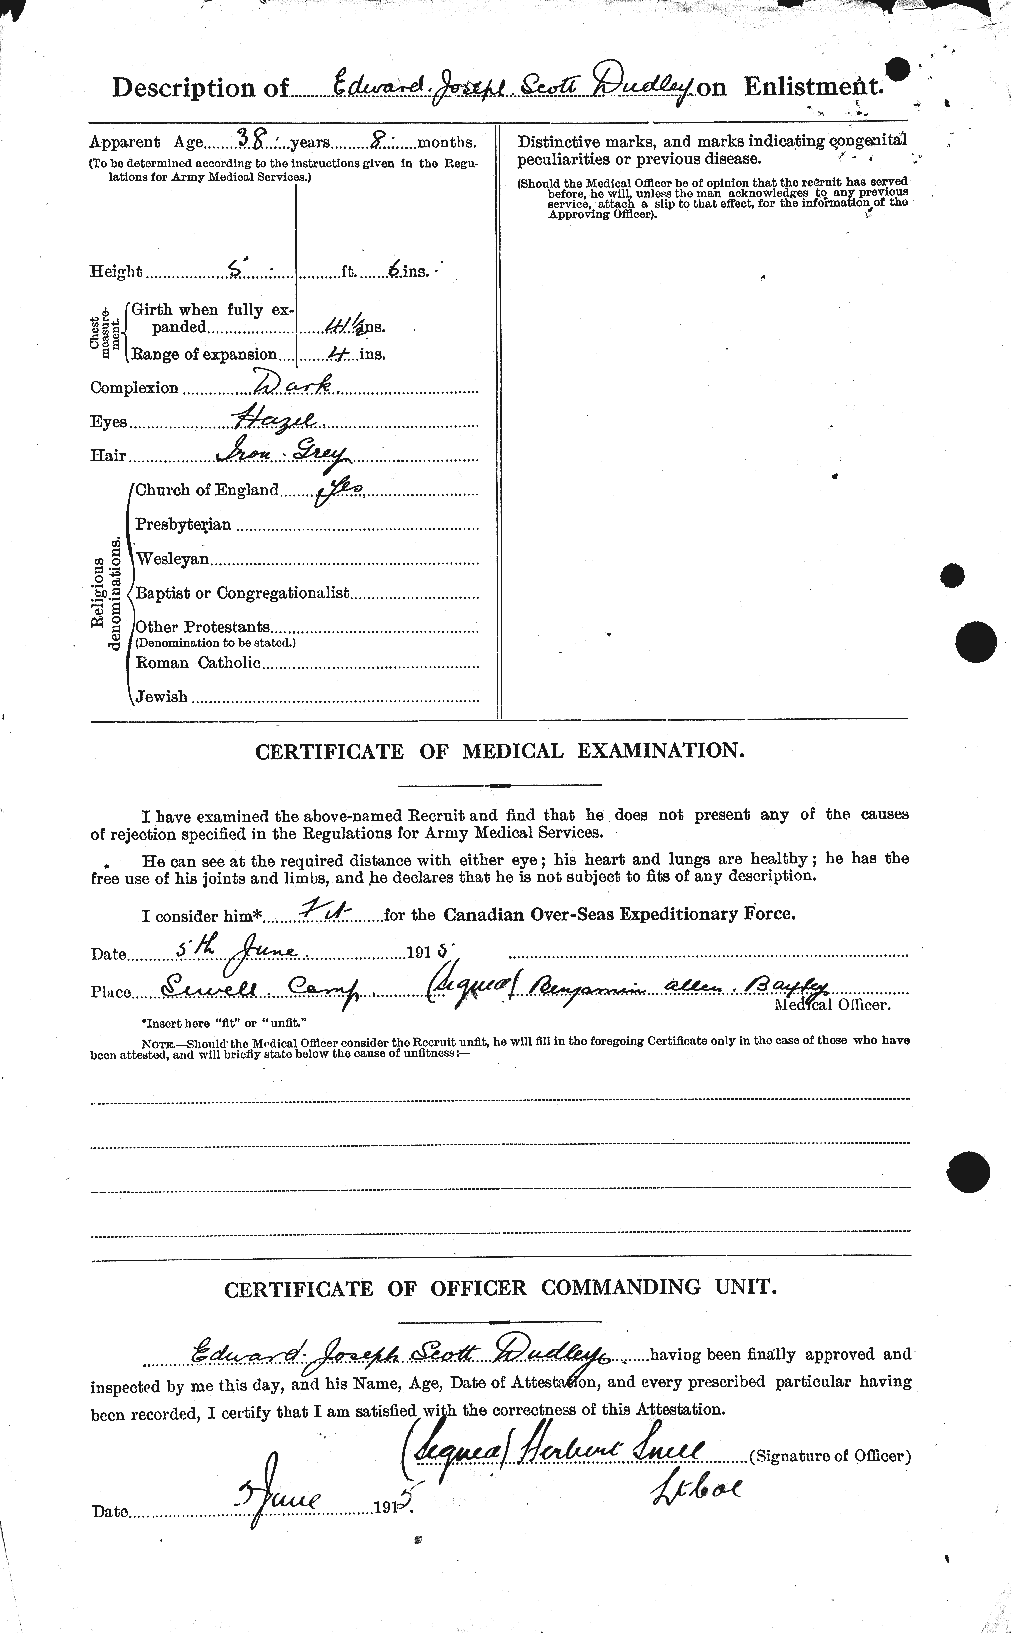 Personnel Records of the First World War - CEF 087243b